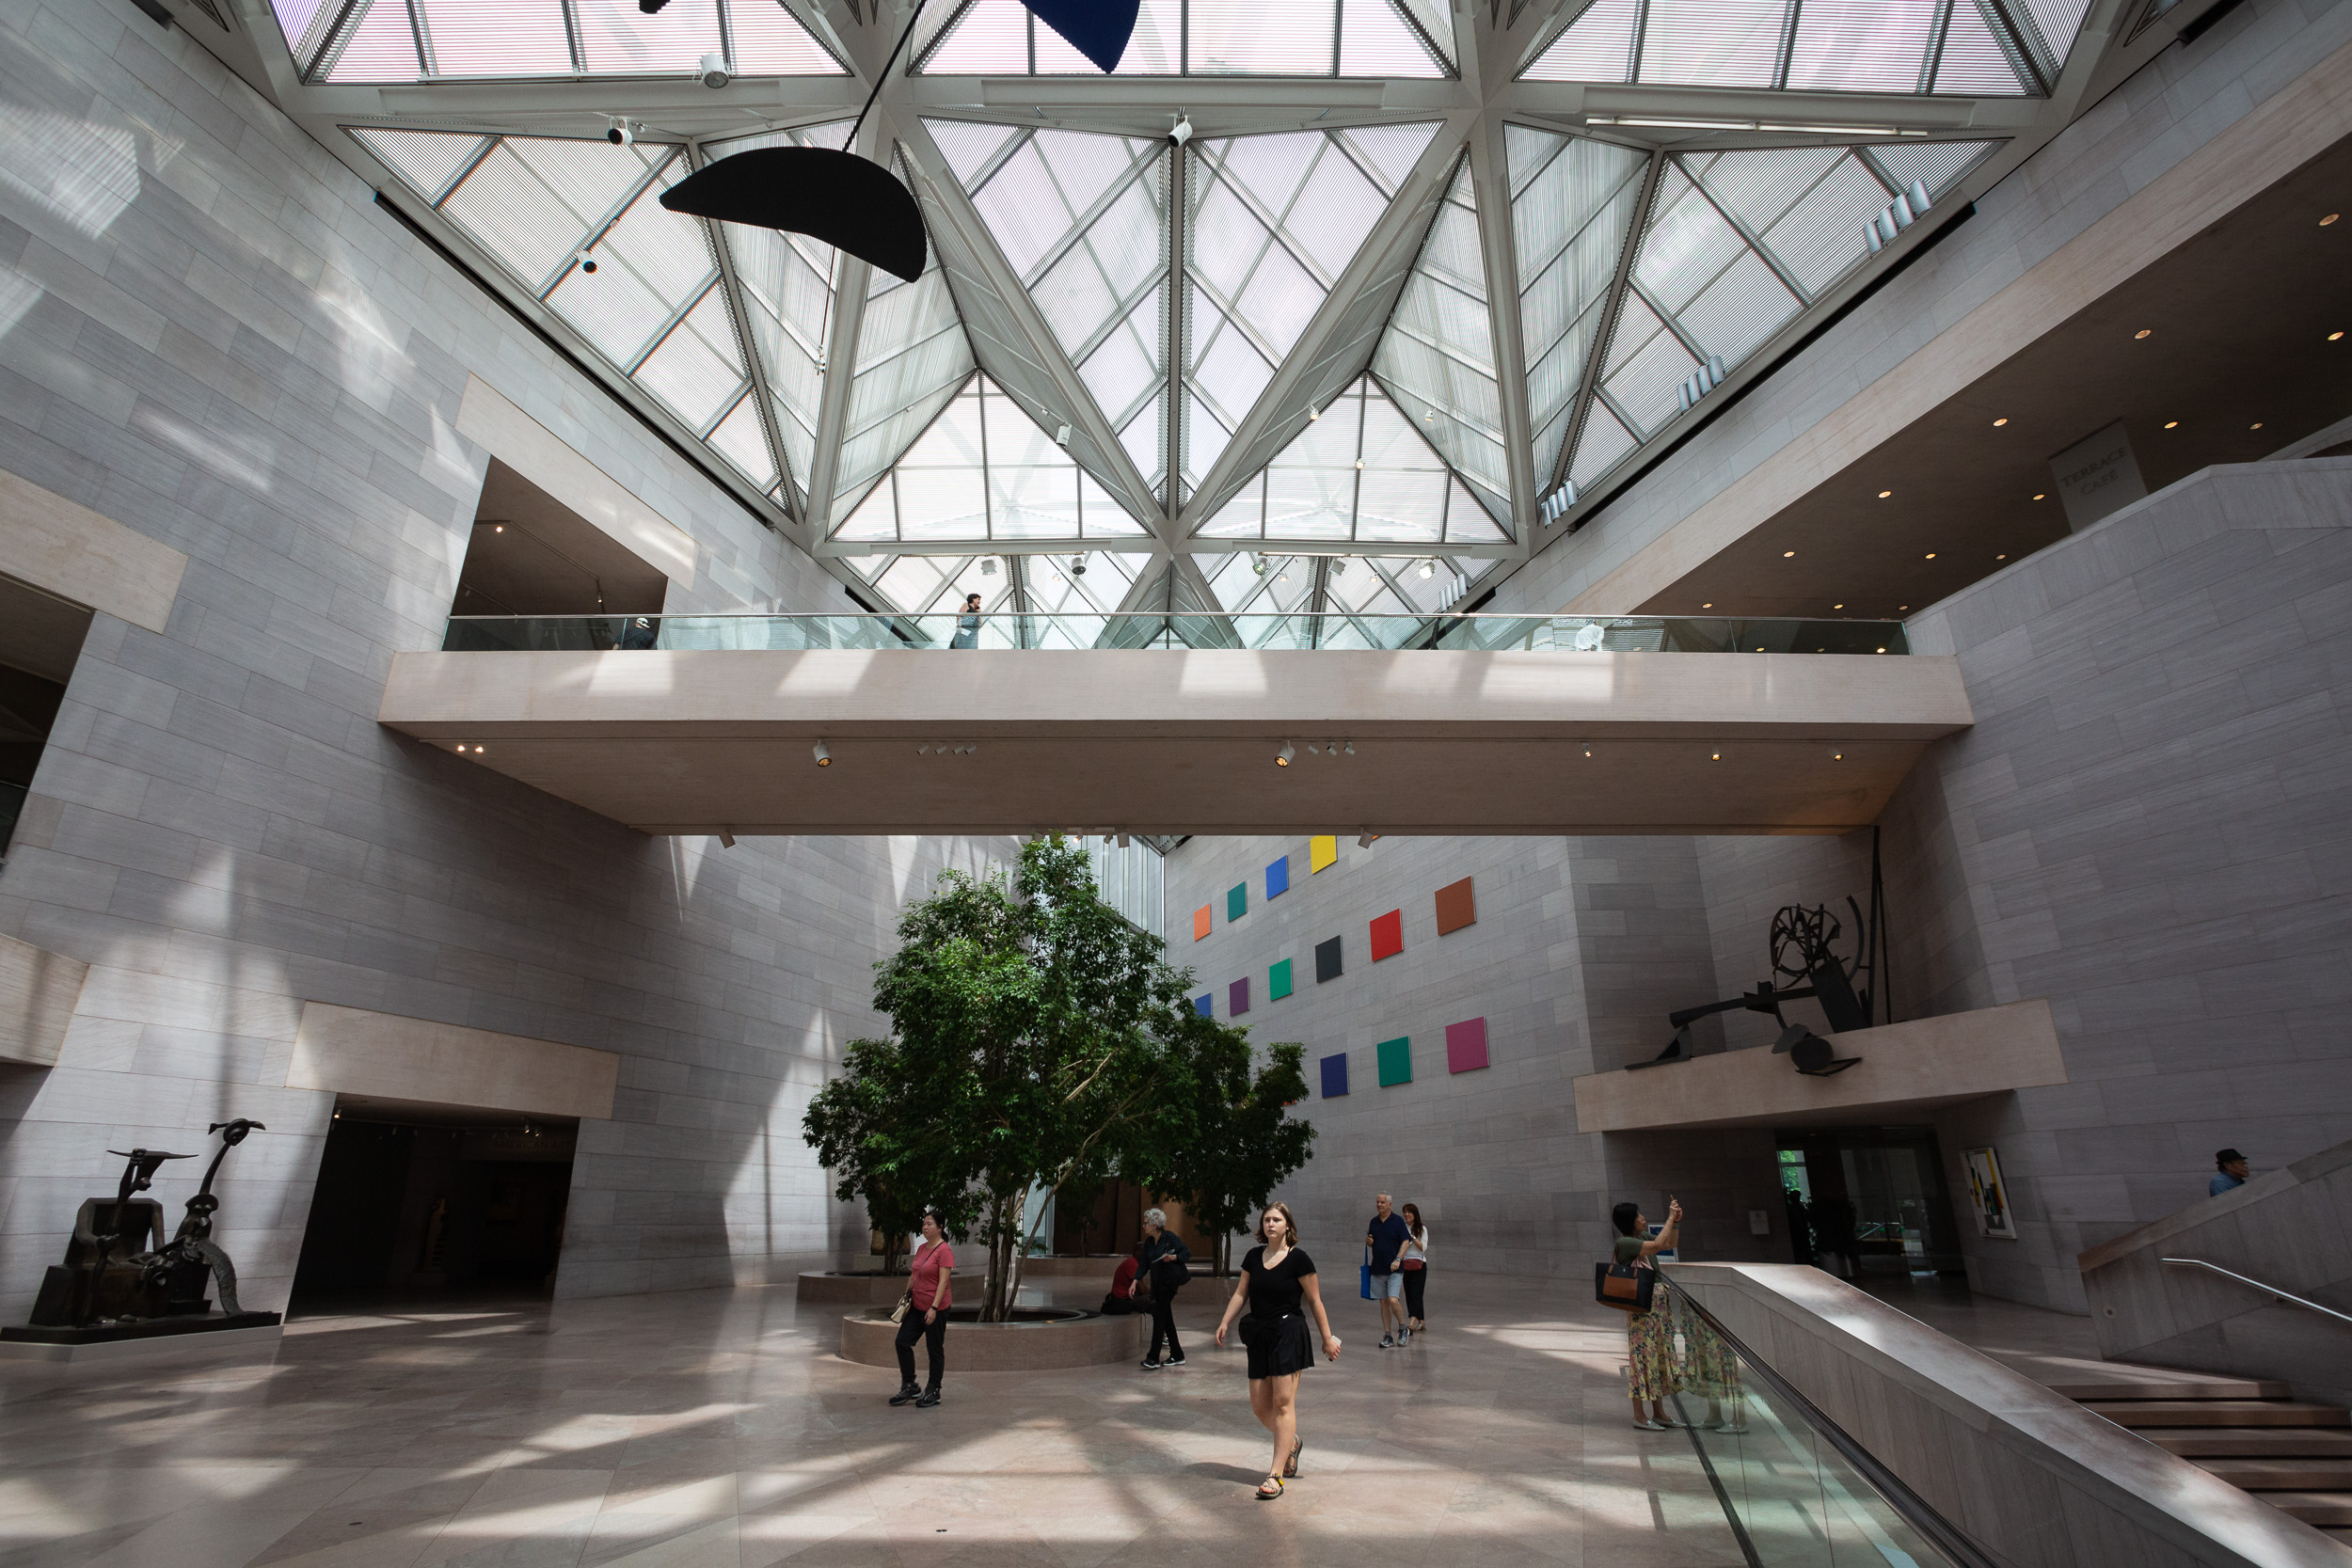  The East Building of the National Gallery of Art in Washington, D.C., on May 27, 2019. 